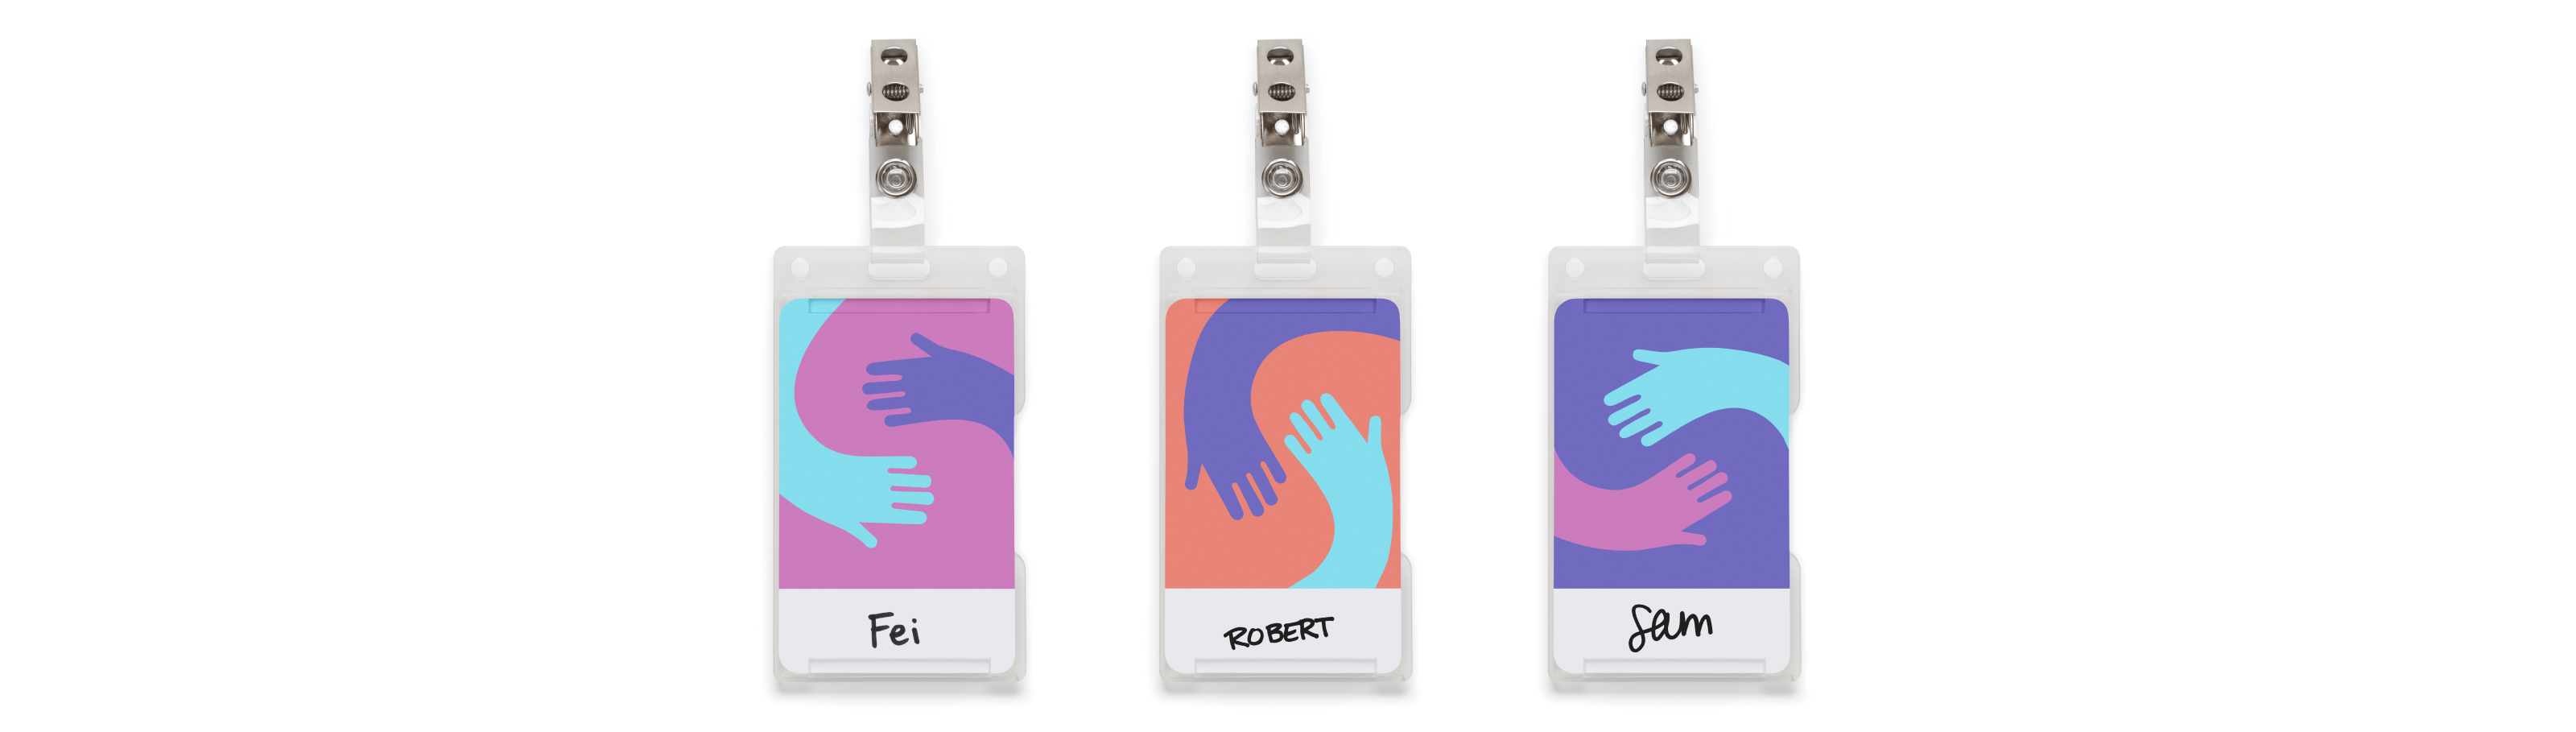 Name tag examples that show use of the hand illustrations.